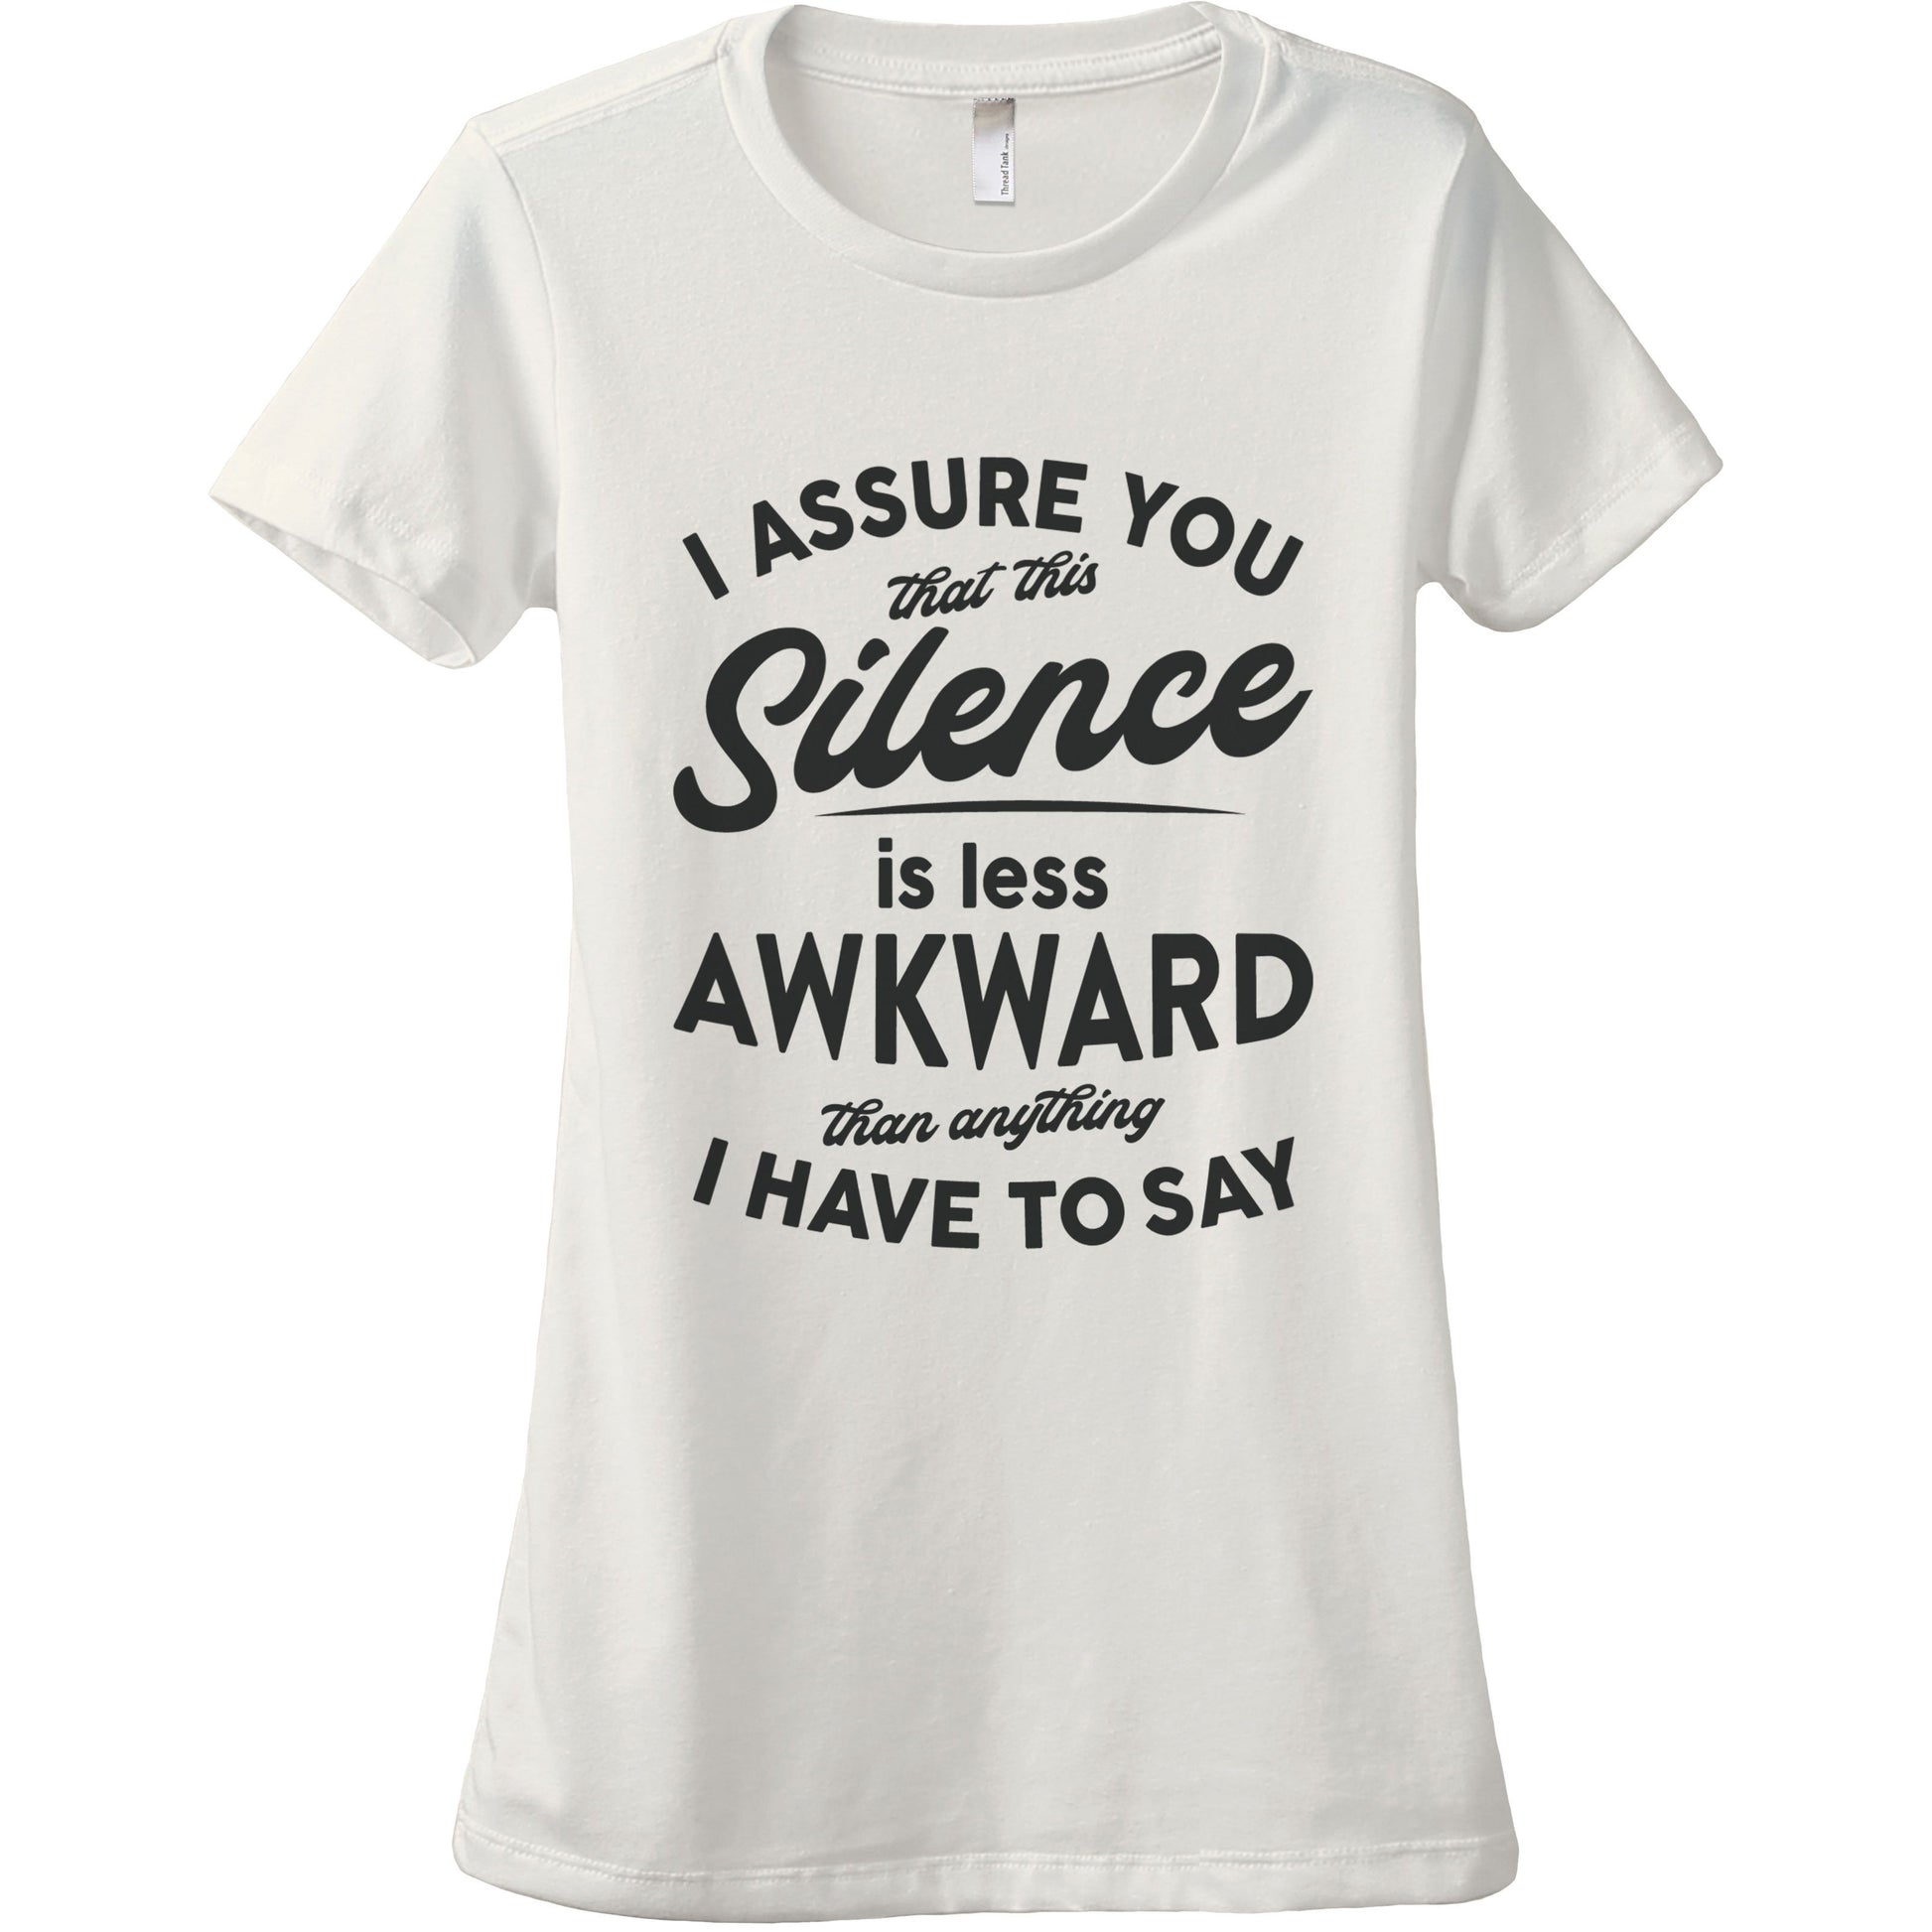 5. I Assure You That This Silence Is Less Awkward - Stories You Can Wear by Thread Tank